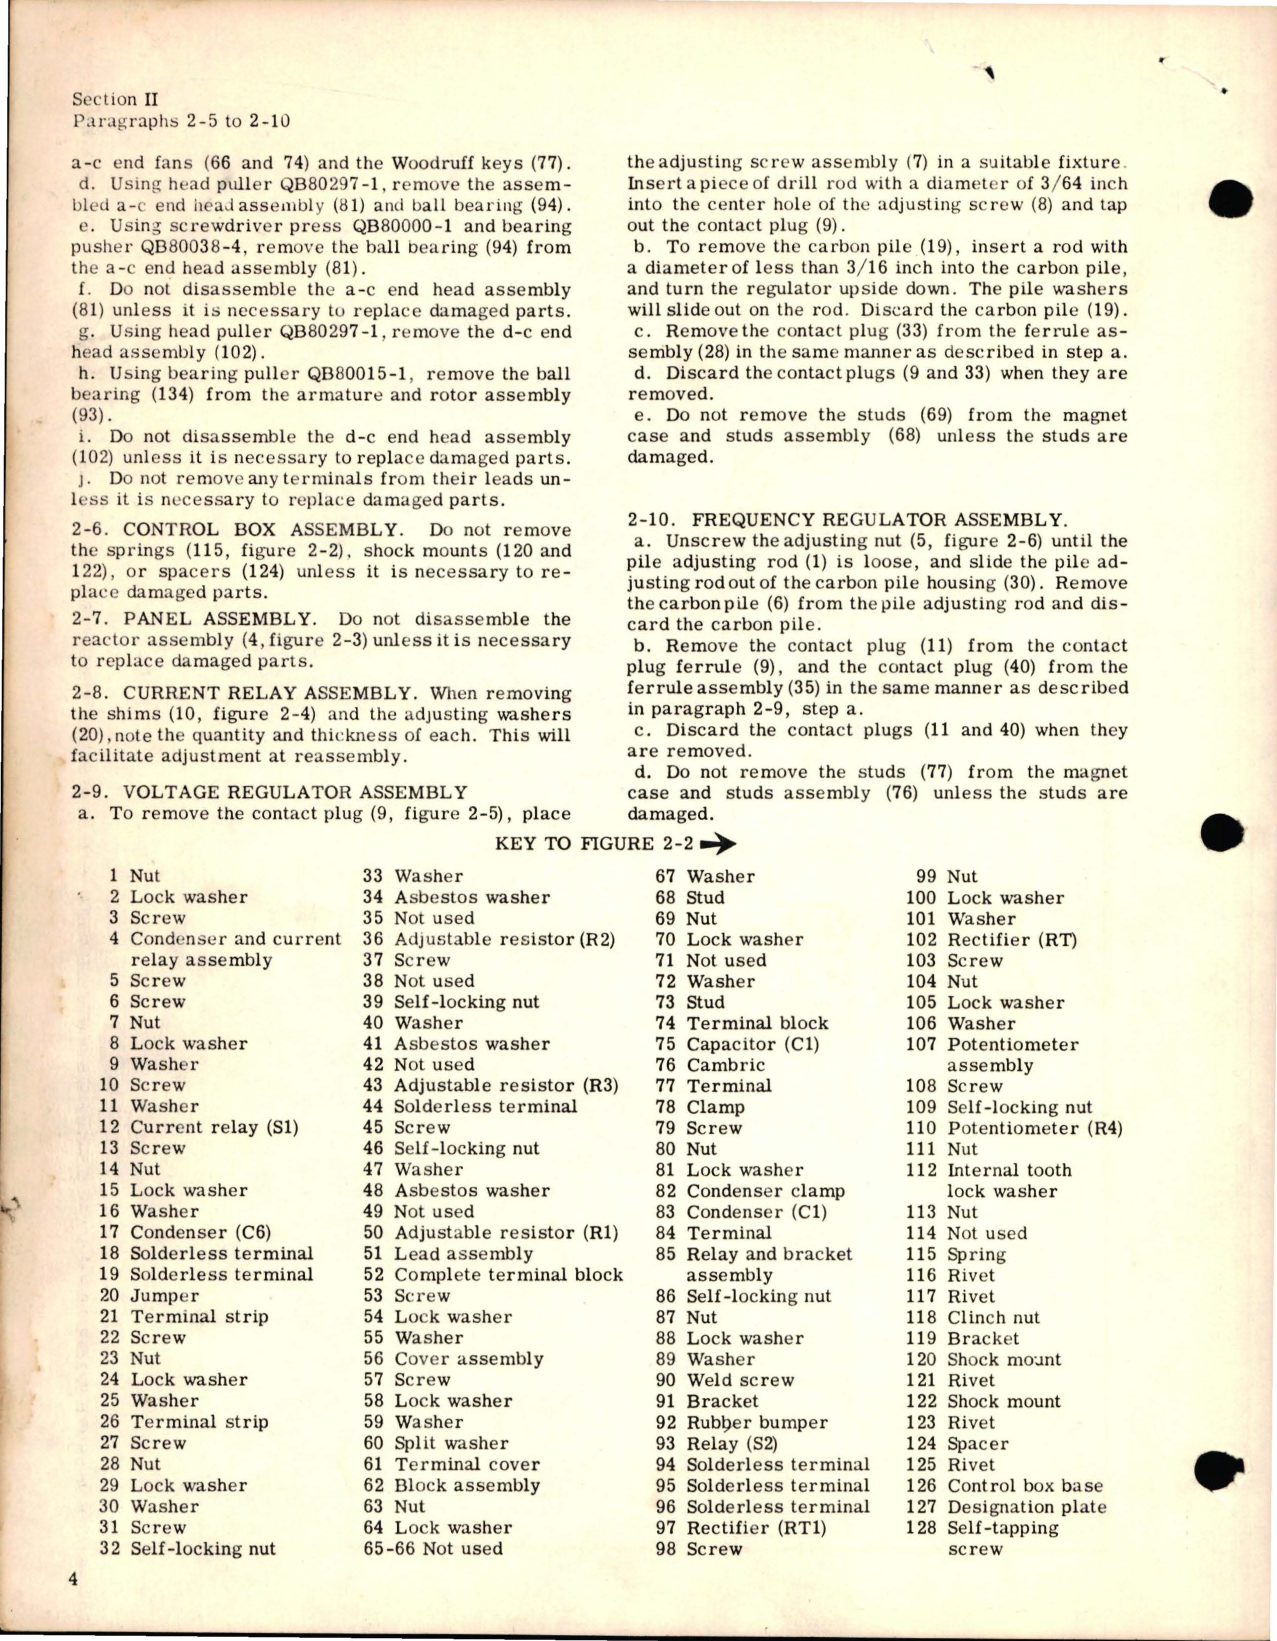 Sample page 8 from AirCorps Library document: Overhaul Instructions for Inverters 